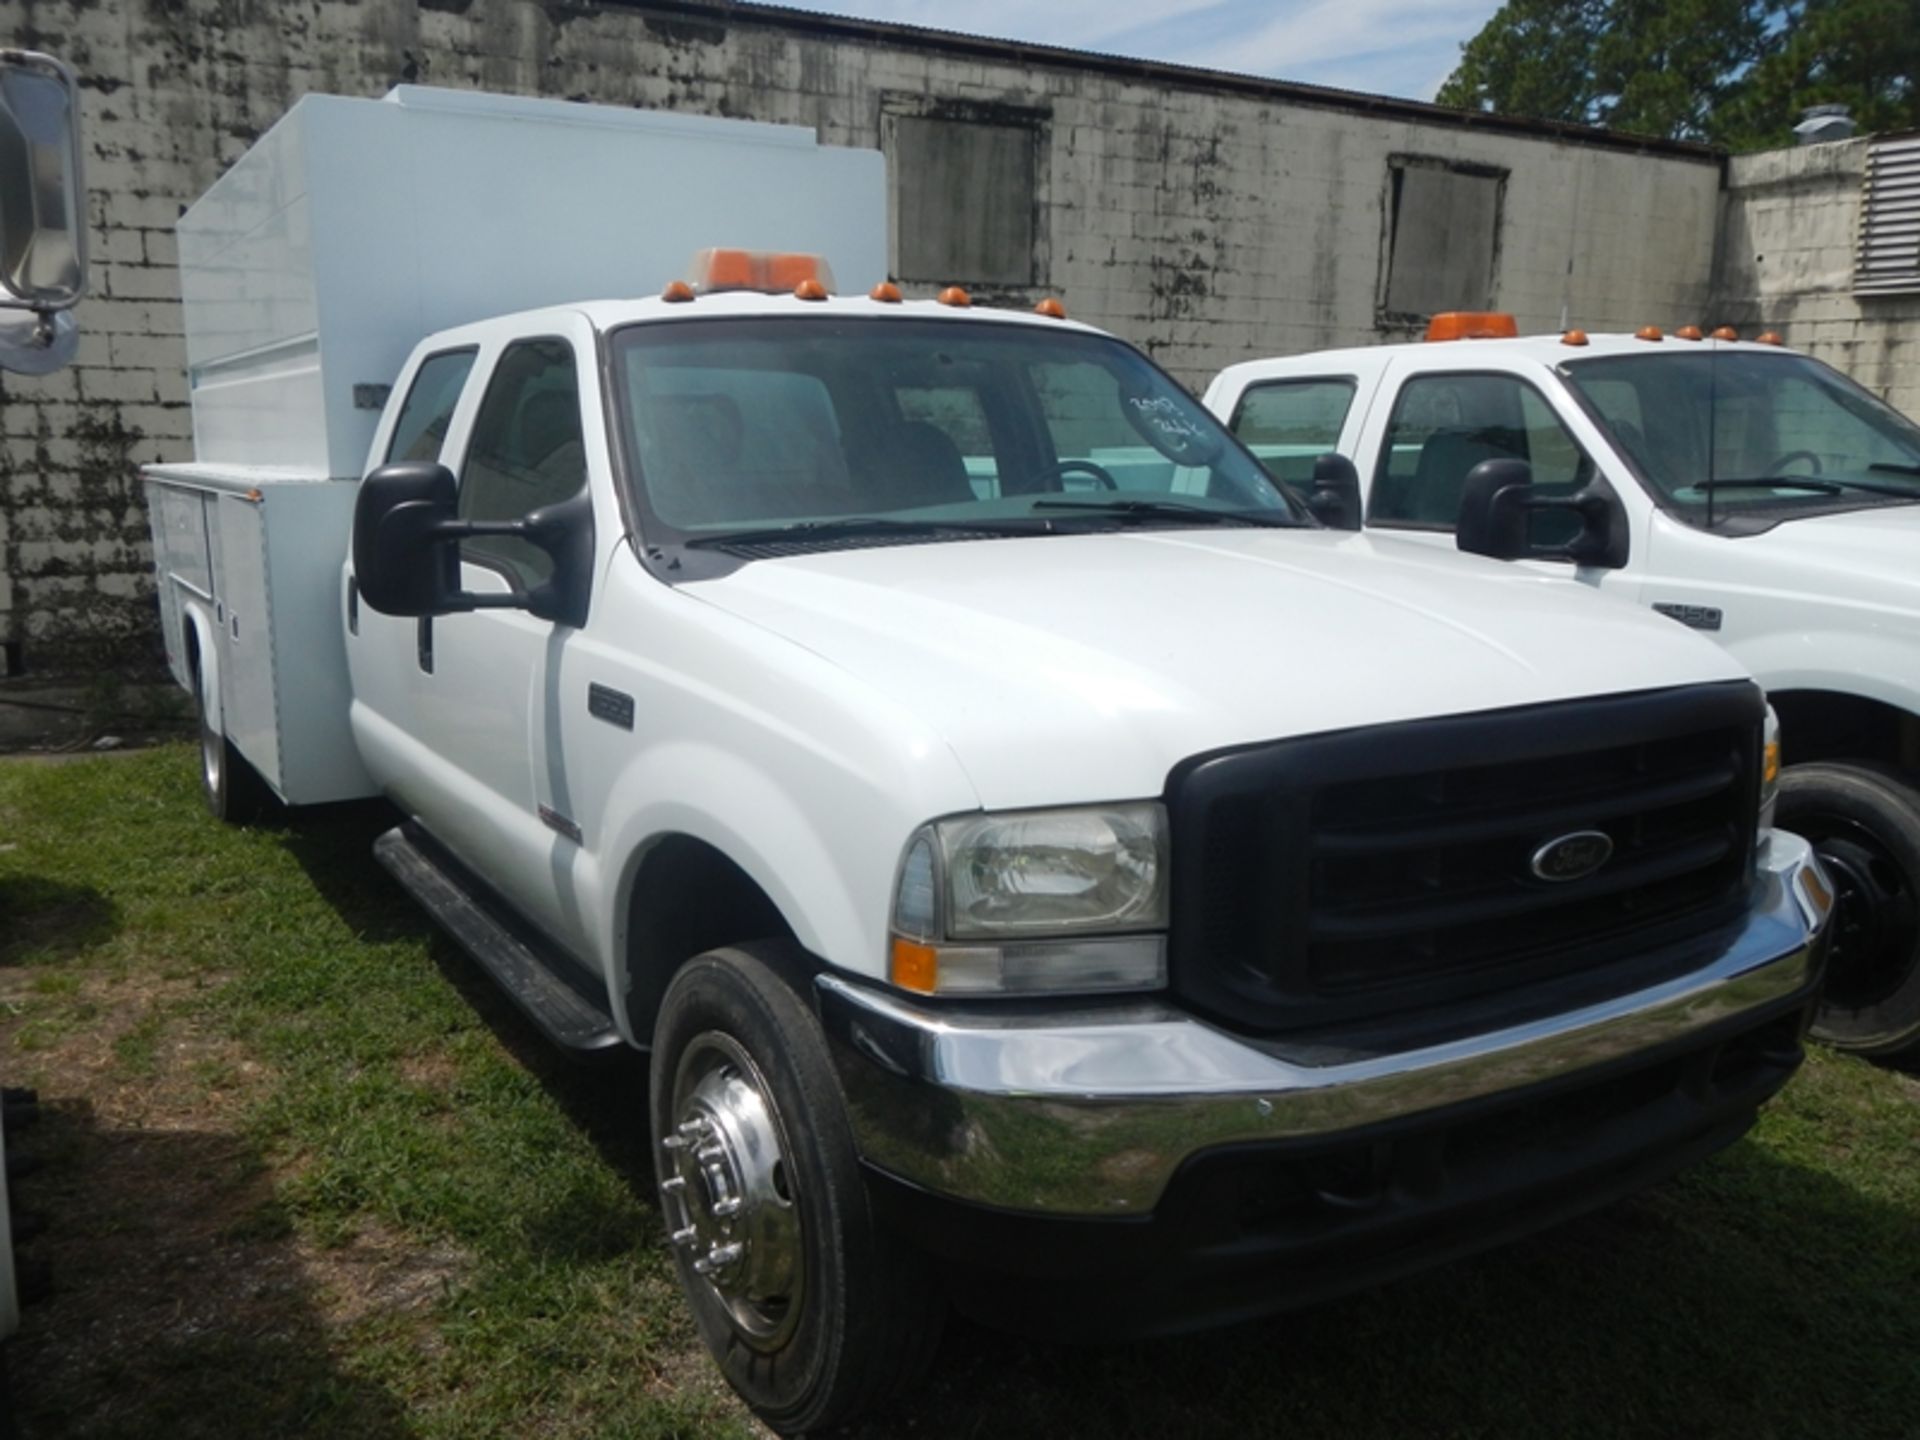 2003 FORD F550 crew cab, covered utility body, diesel (rebuilt 25K ago) - 266,663 miles - 1FDAW56P33 - Image 2 of 7